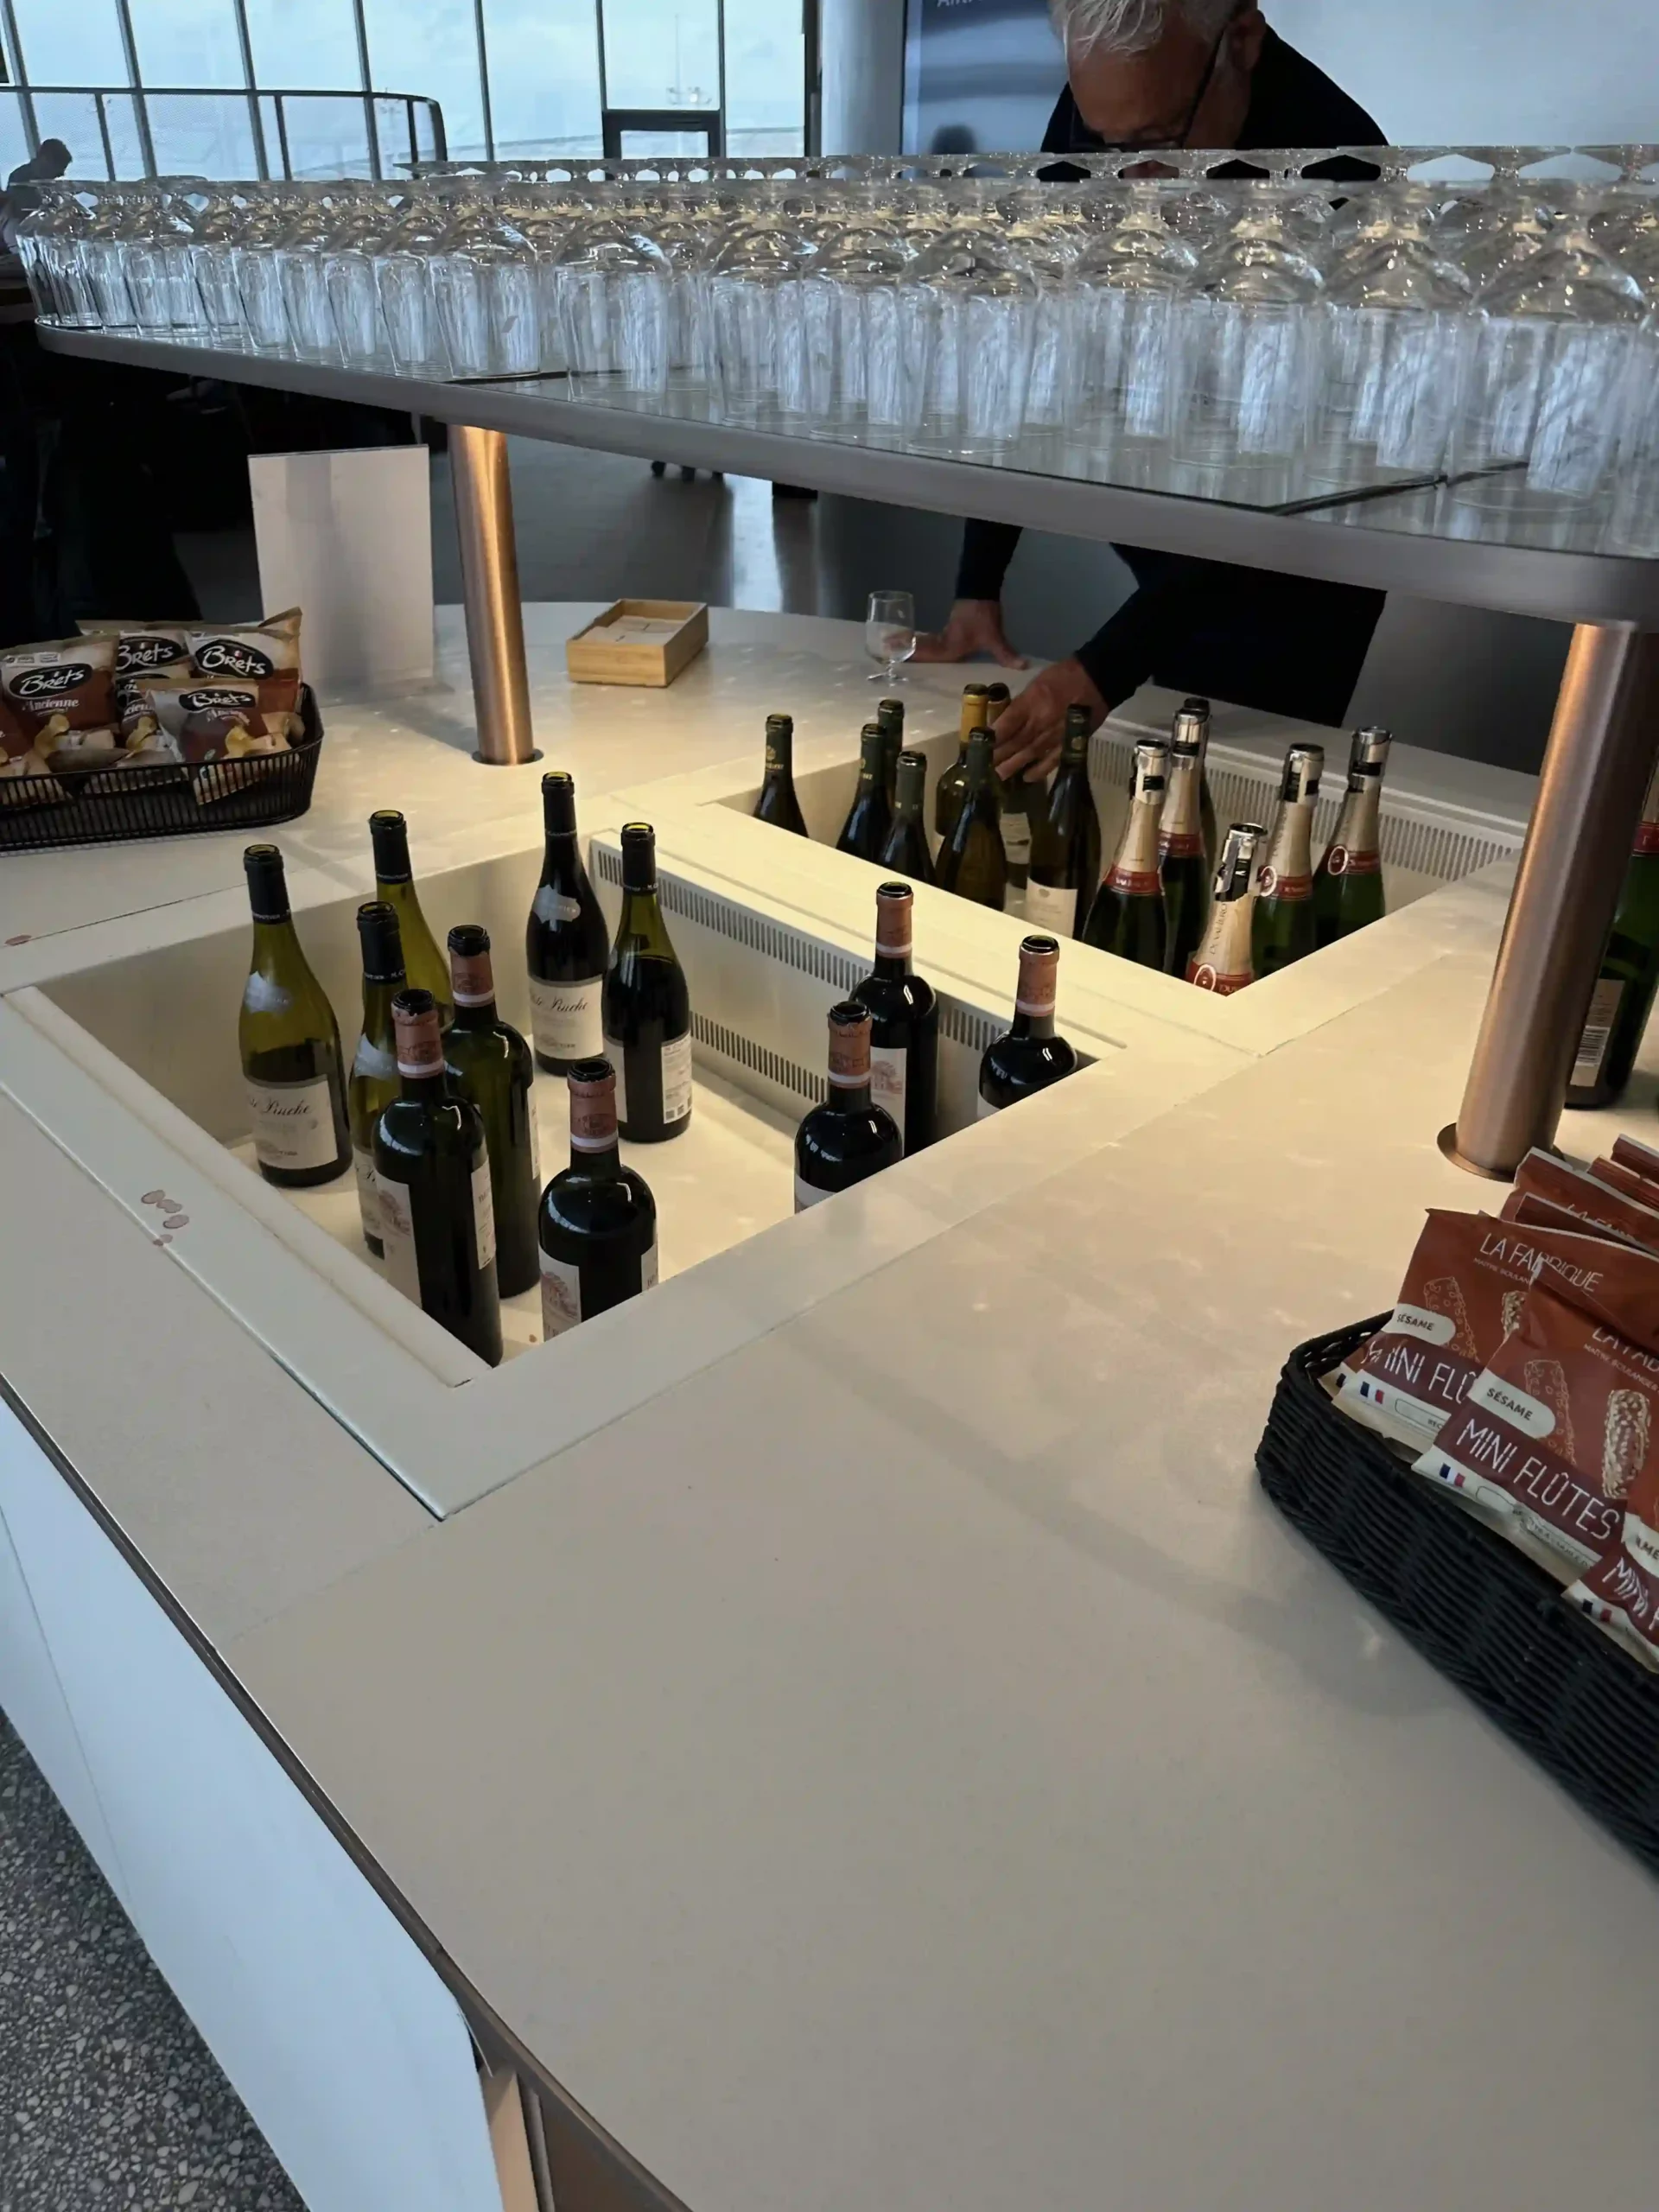 a group of wine bottles in a cooler